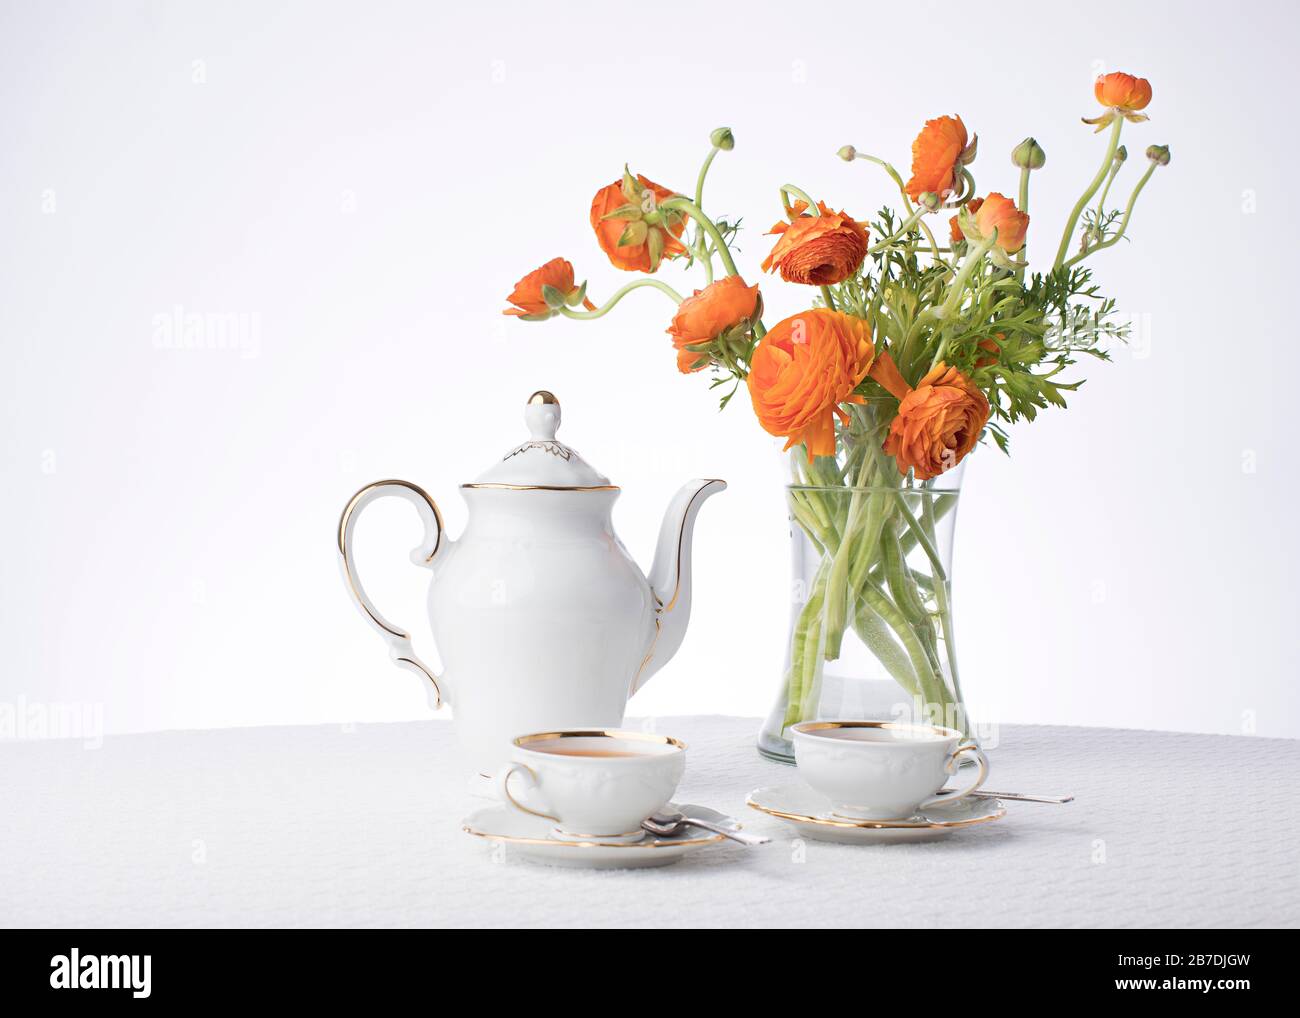 Clean crisp whites with metallic gold trim shows tea for two with fresh orange blossoms in a tall clear vase on a white studio background Stock Photo